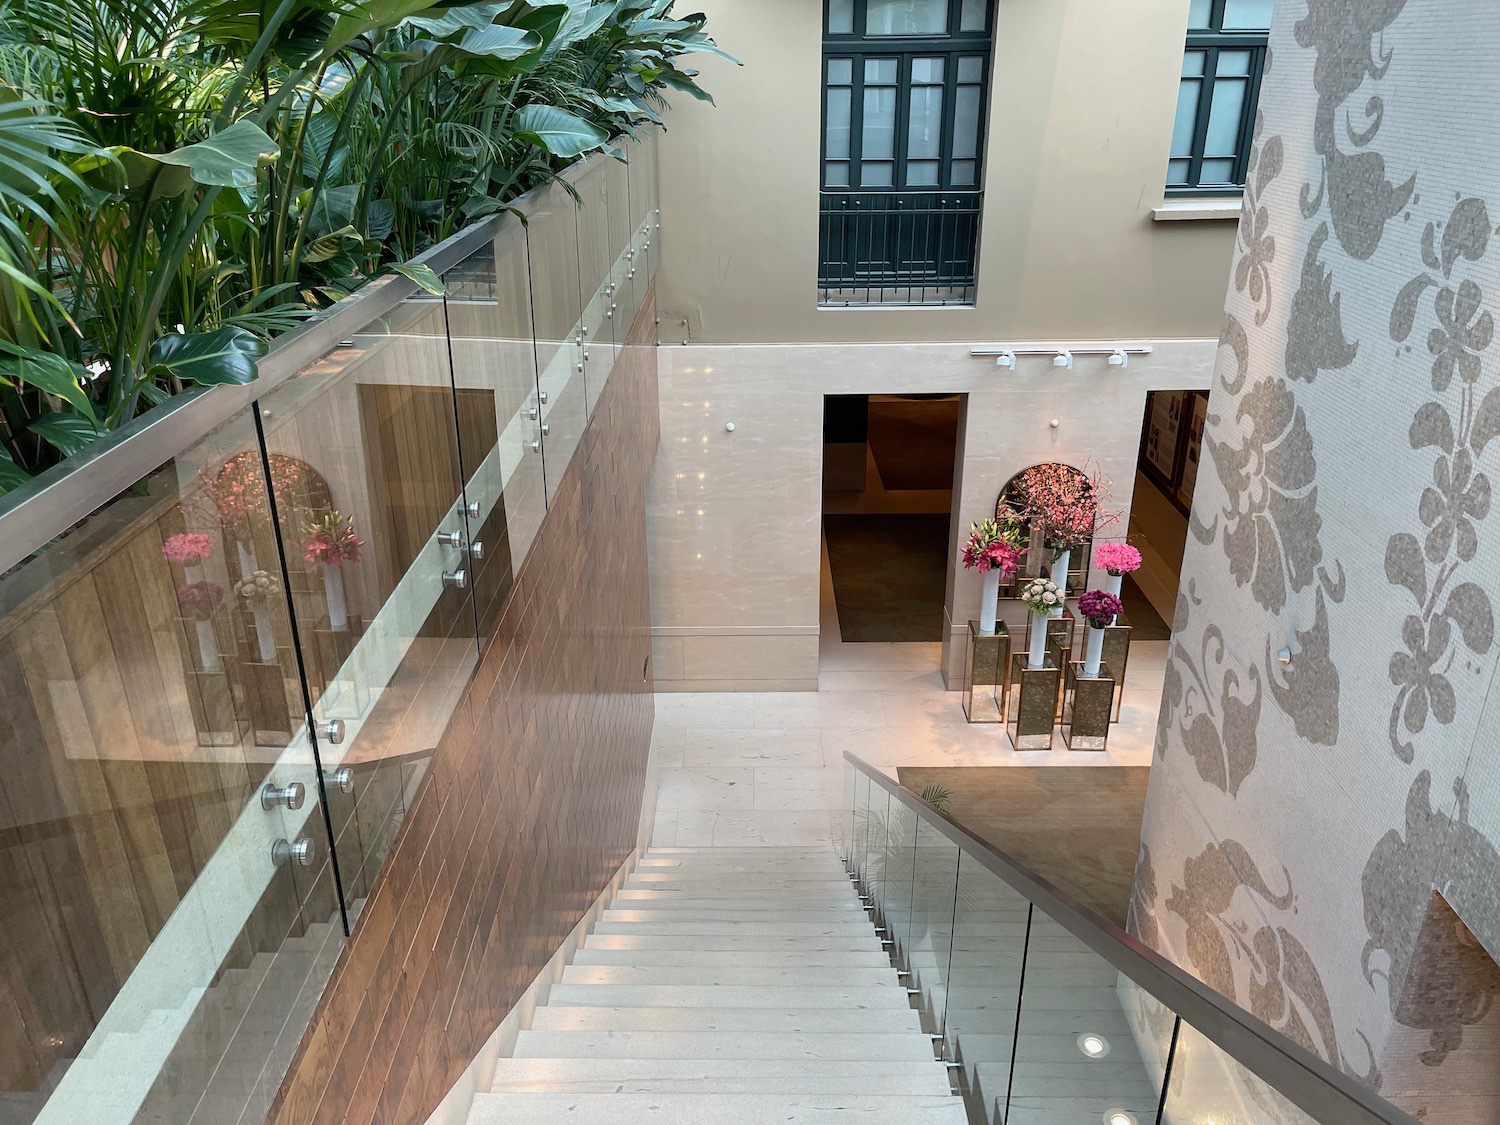 a staircase with glass railings and plants